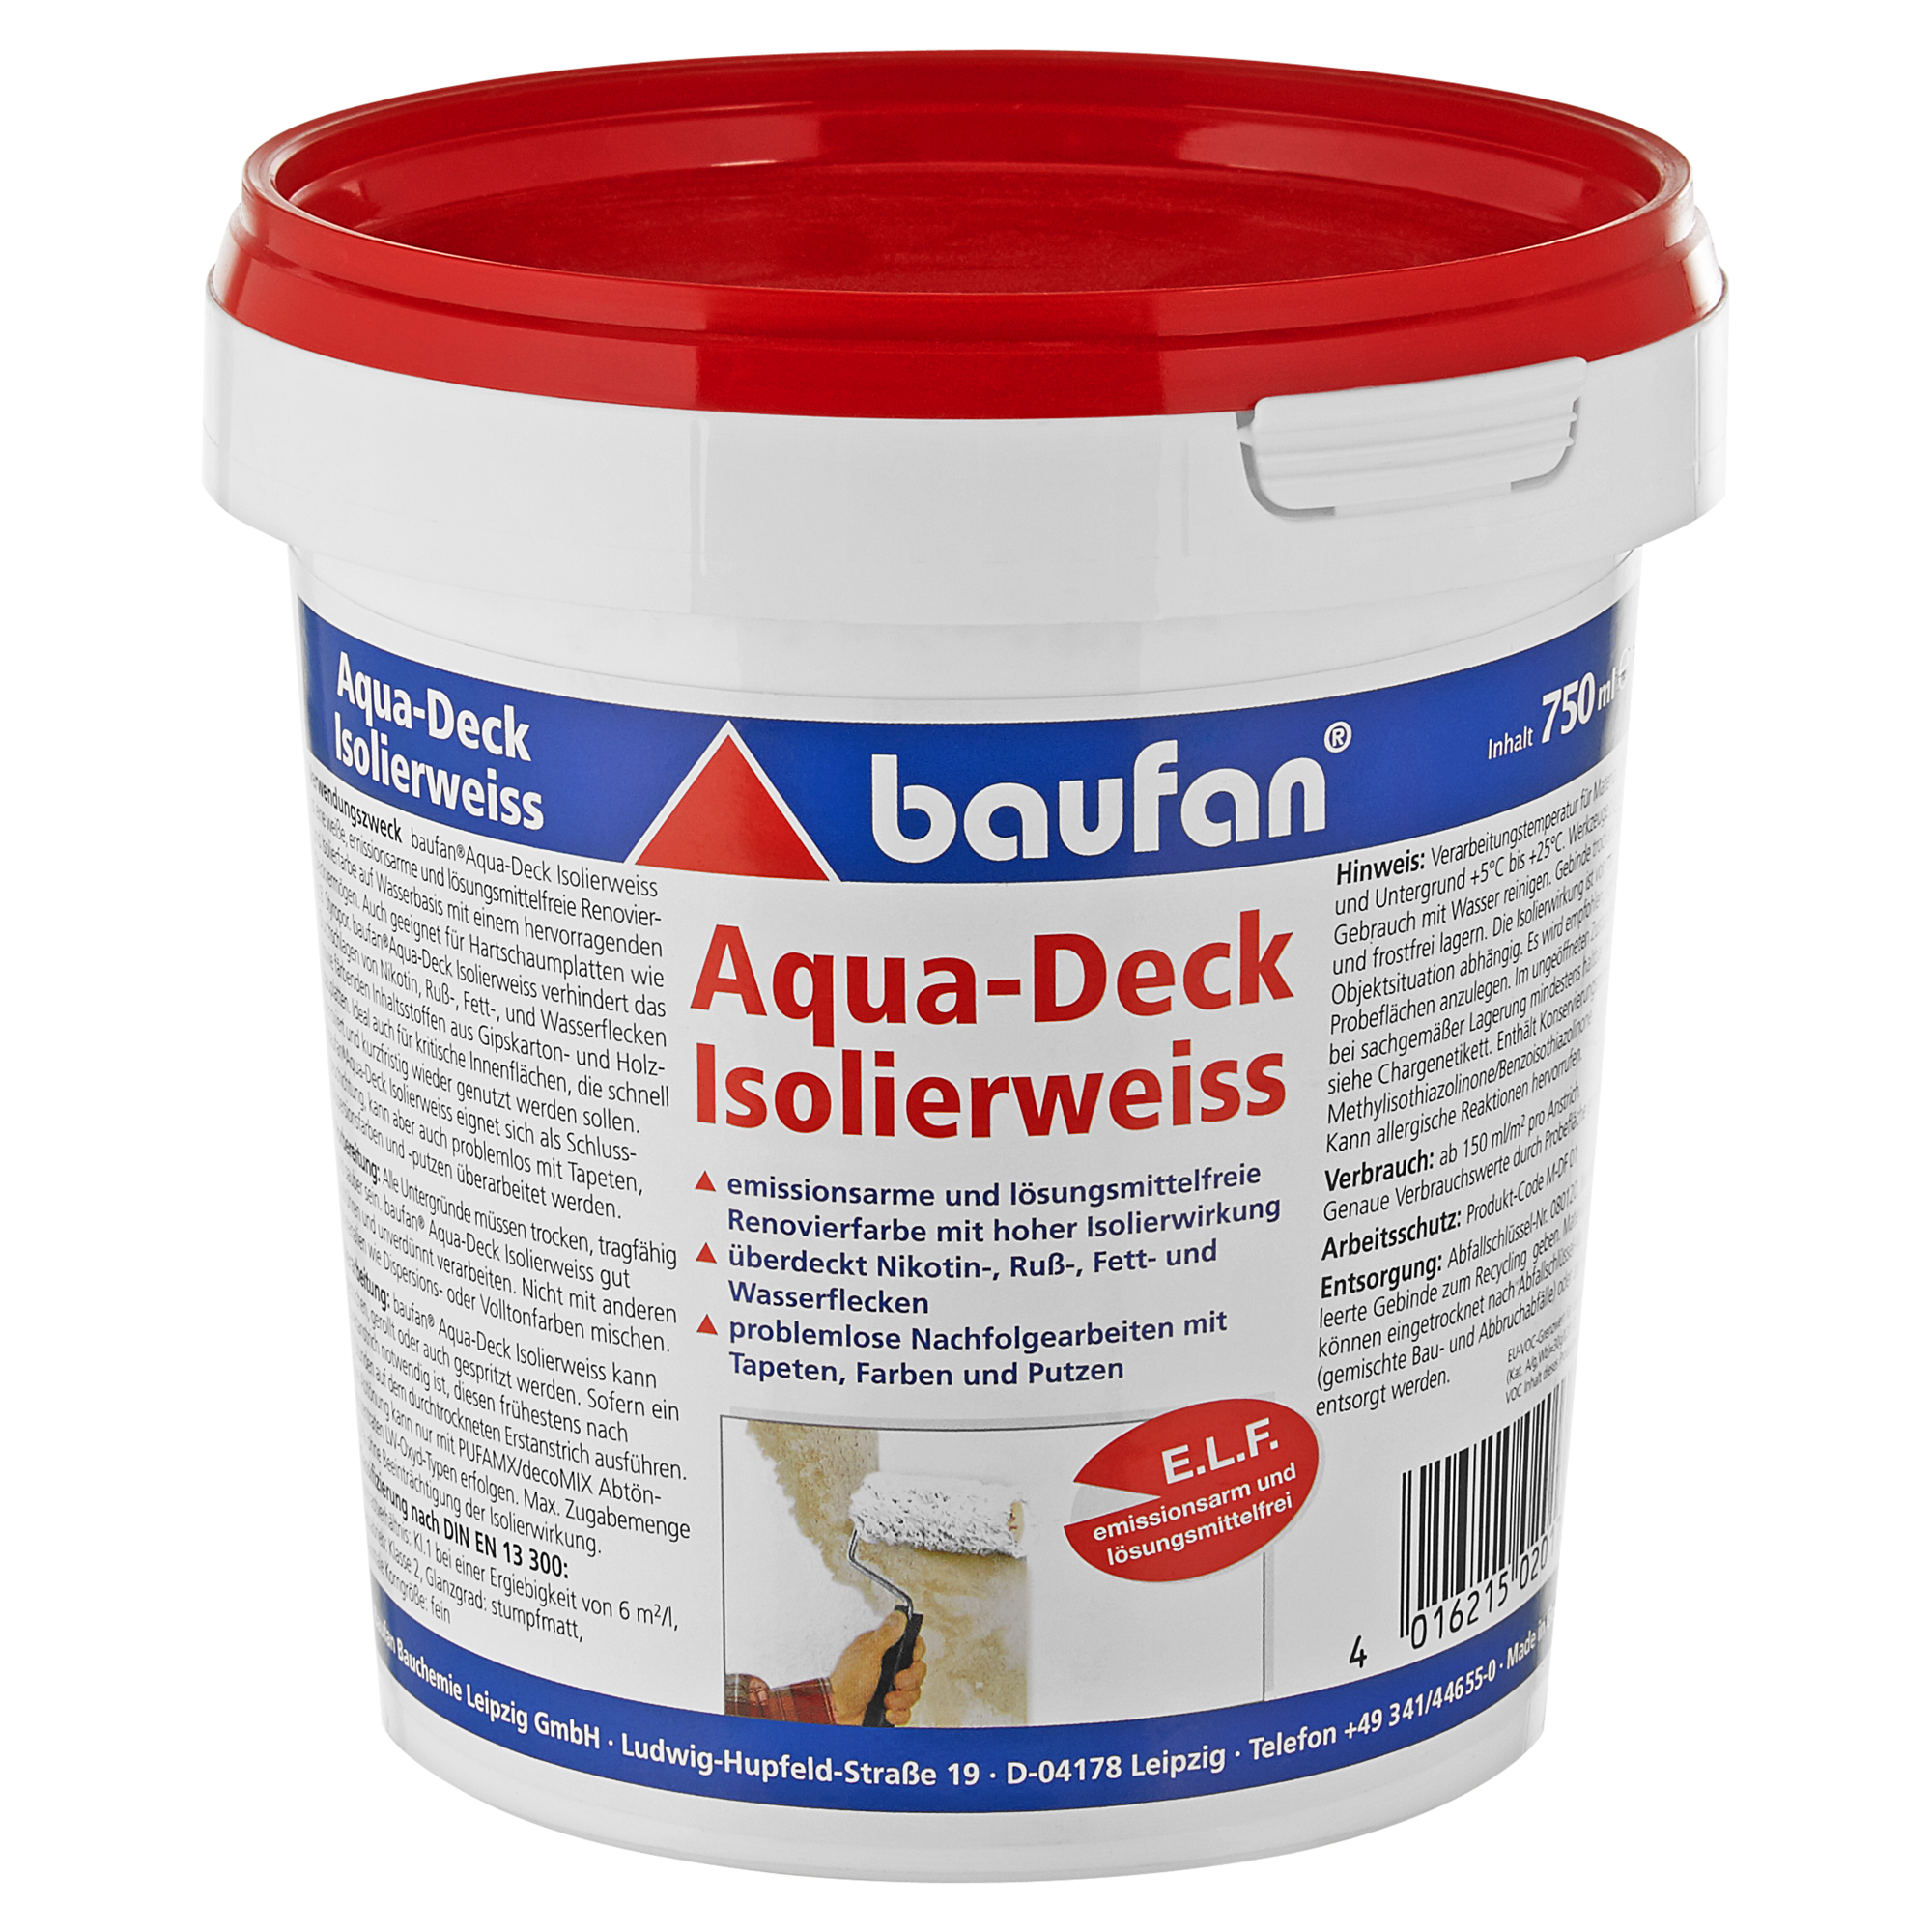 Isolierweiß 'Aqua-Deck' 750 ml + product picture